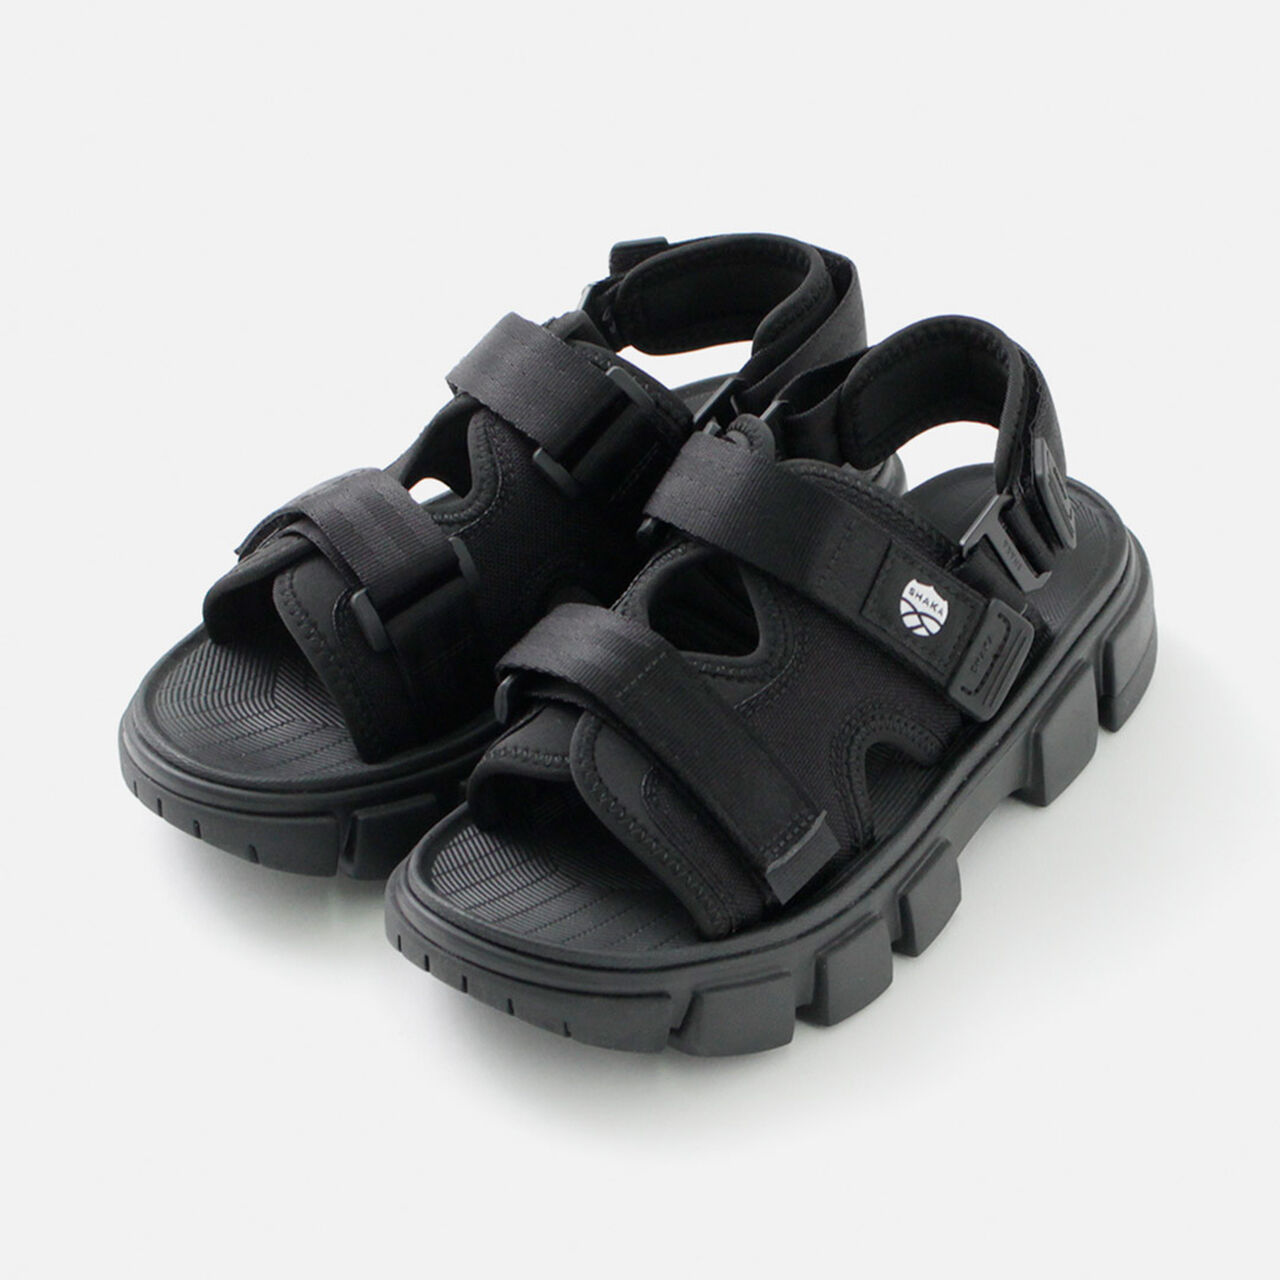 Chill Out SF Sandals,Black, large image number 0